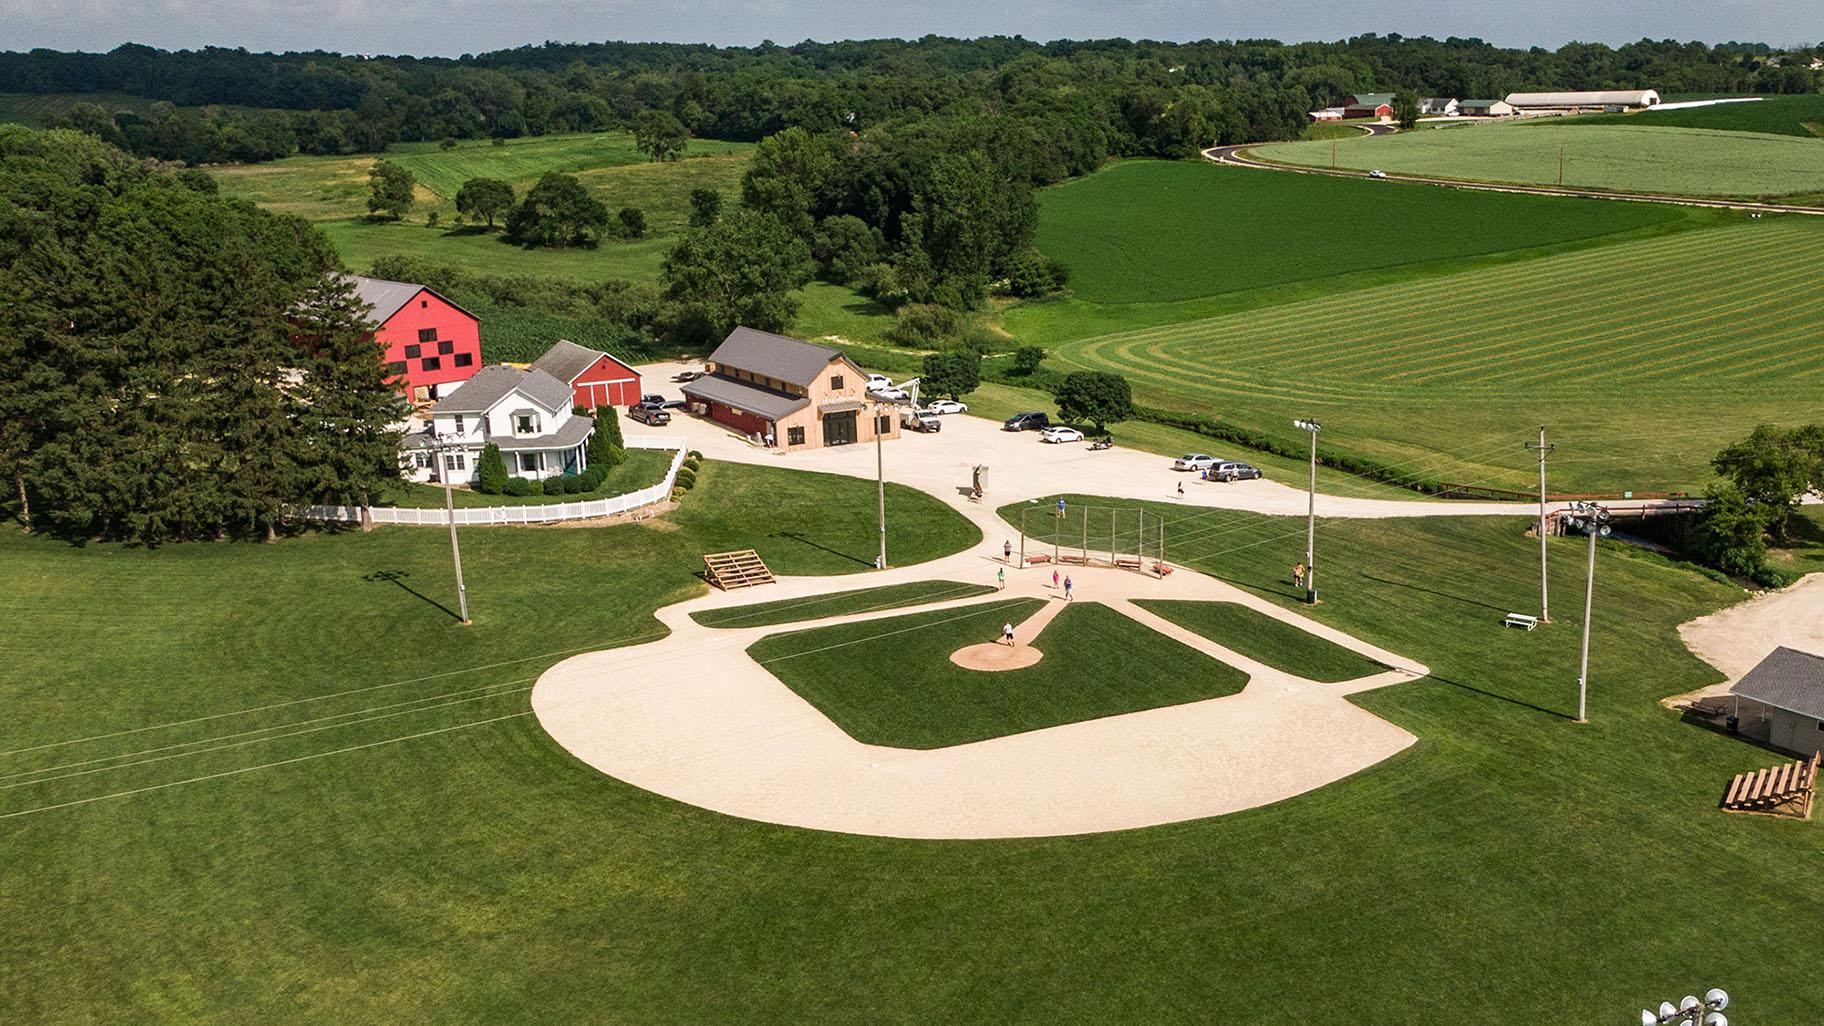 An aerial photo taken with a drone shows the baseball field at the Field of Dreams movie site in Dyersville, Iowa. (Tannen Maury / EPA-EFE / Shutterstock)